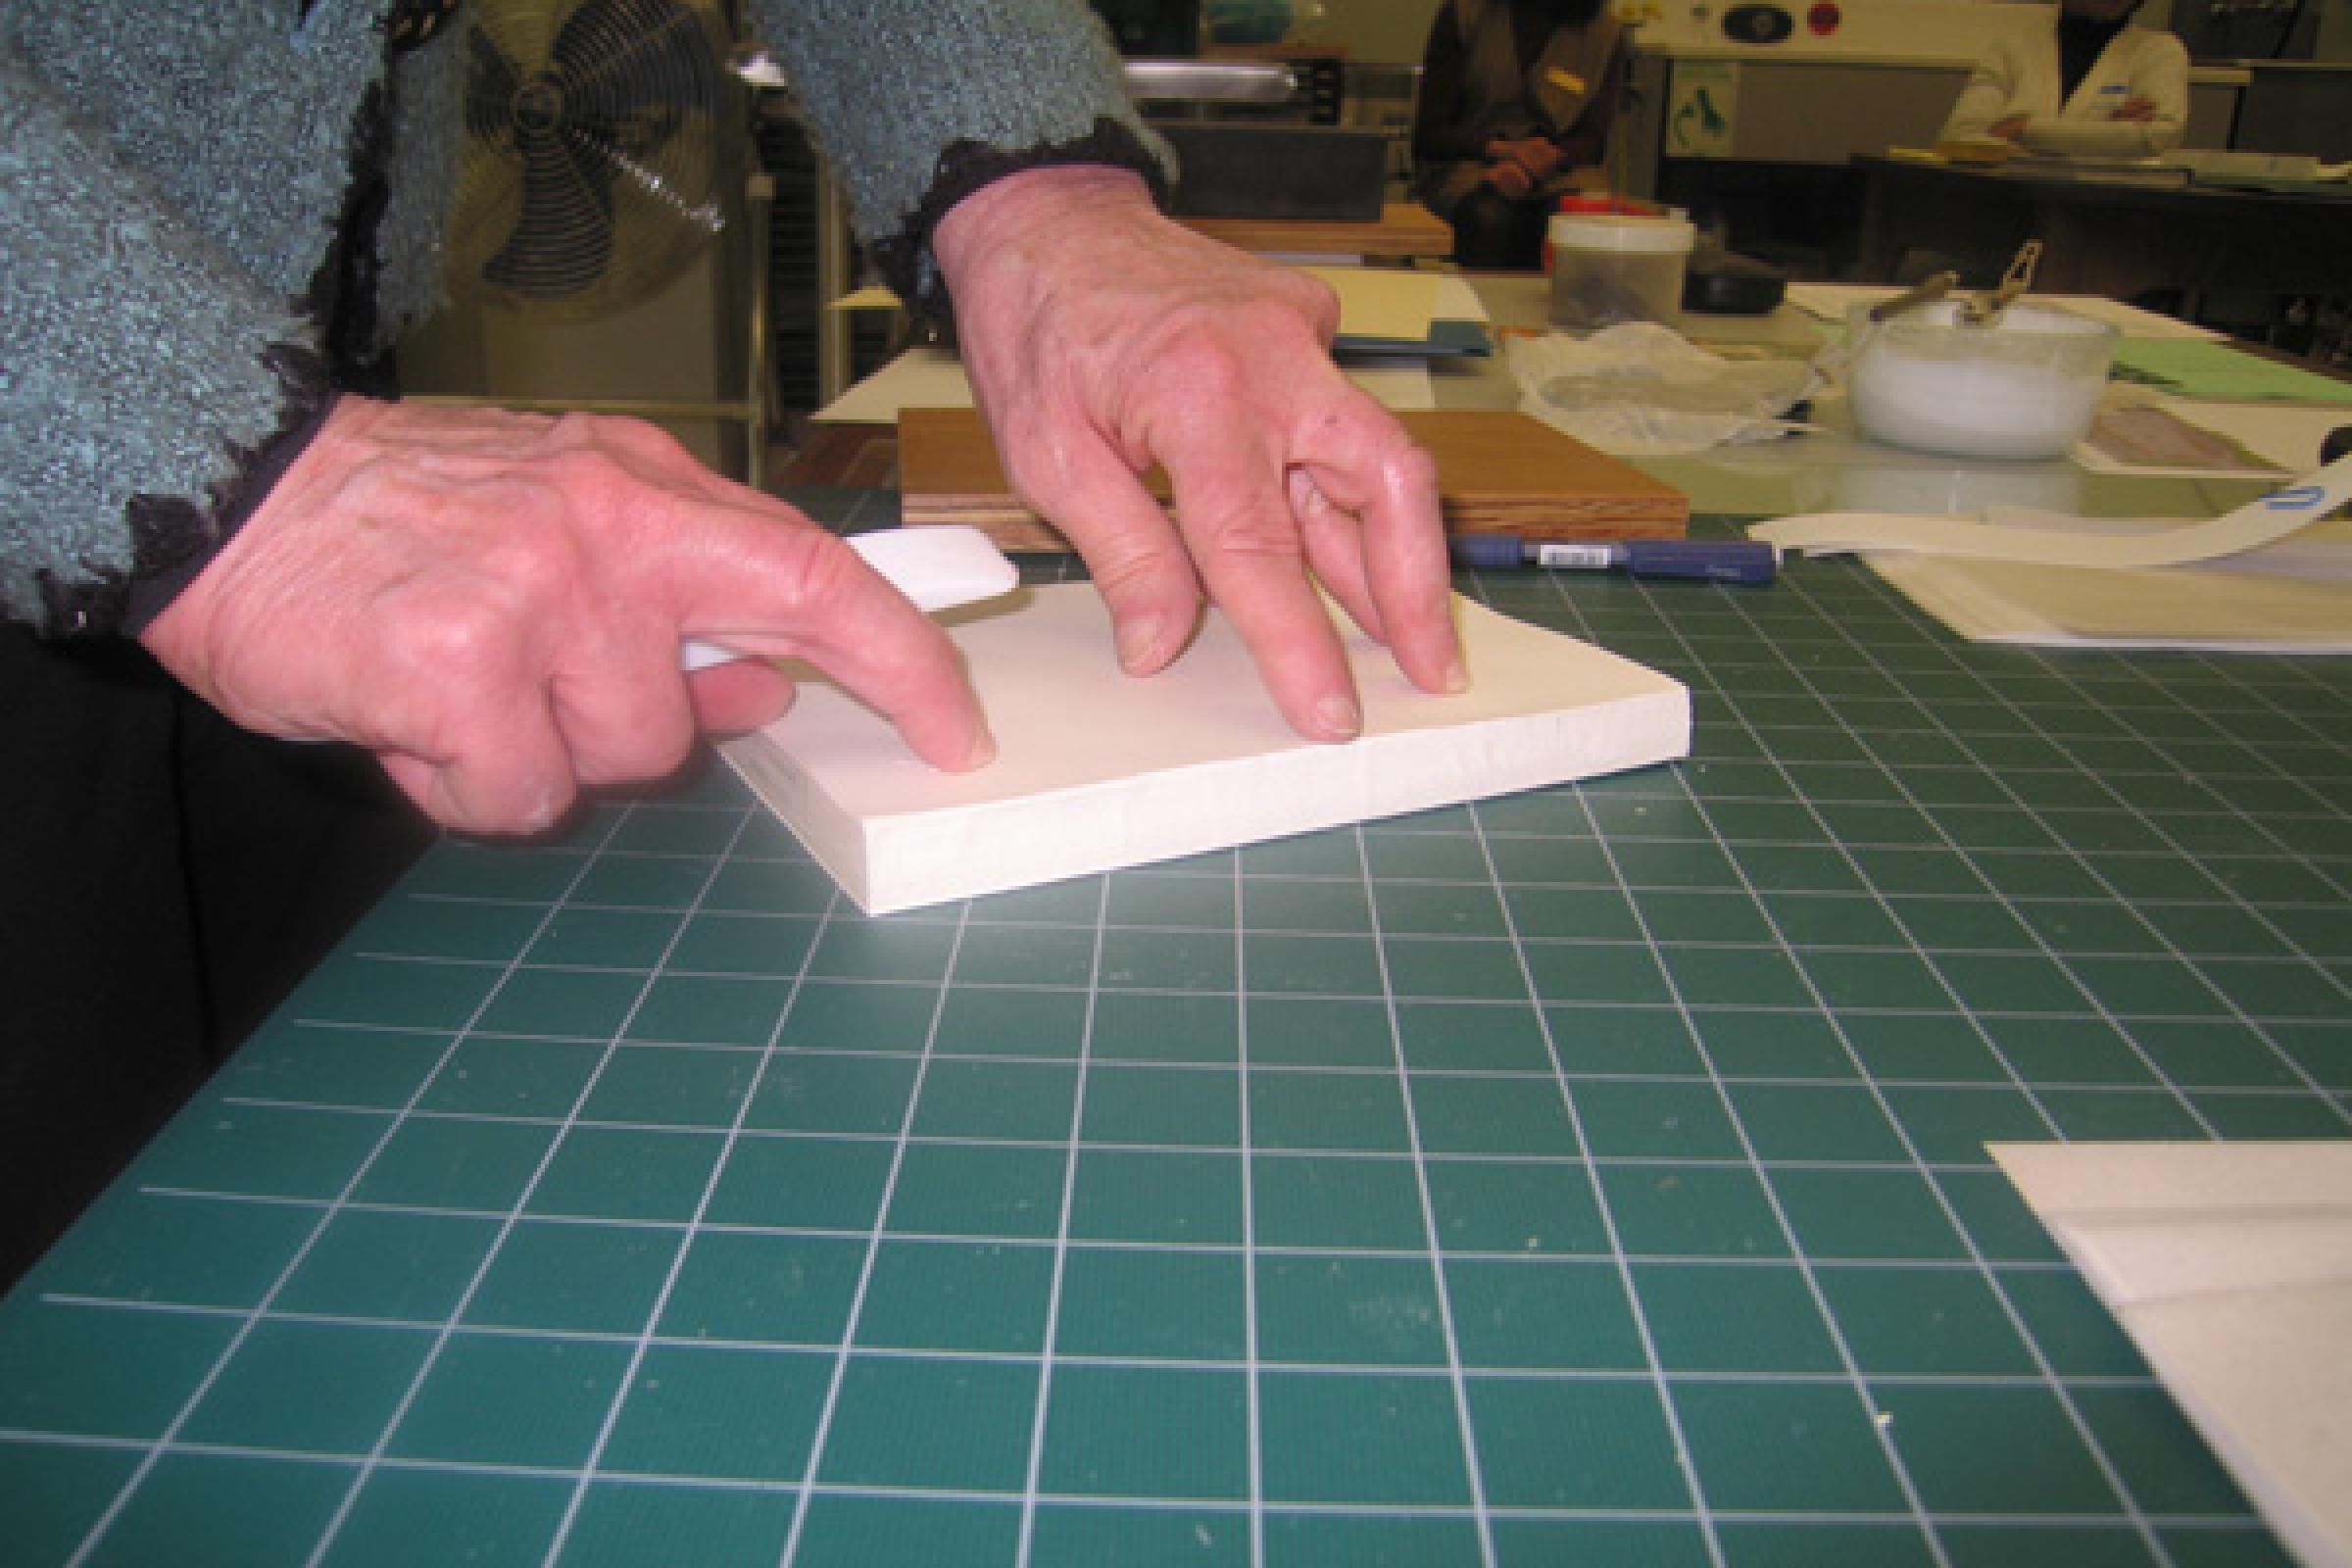 A quick demonstration on fitting endpapers before students attempt the procedure...